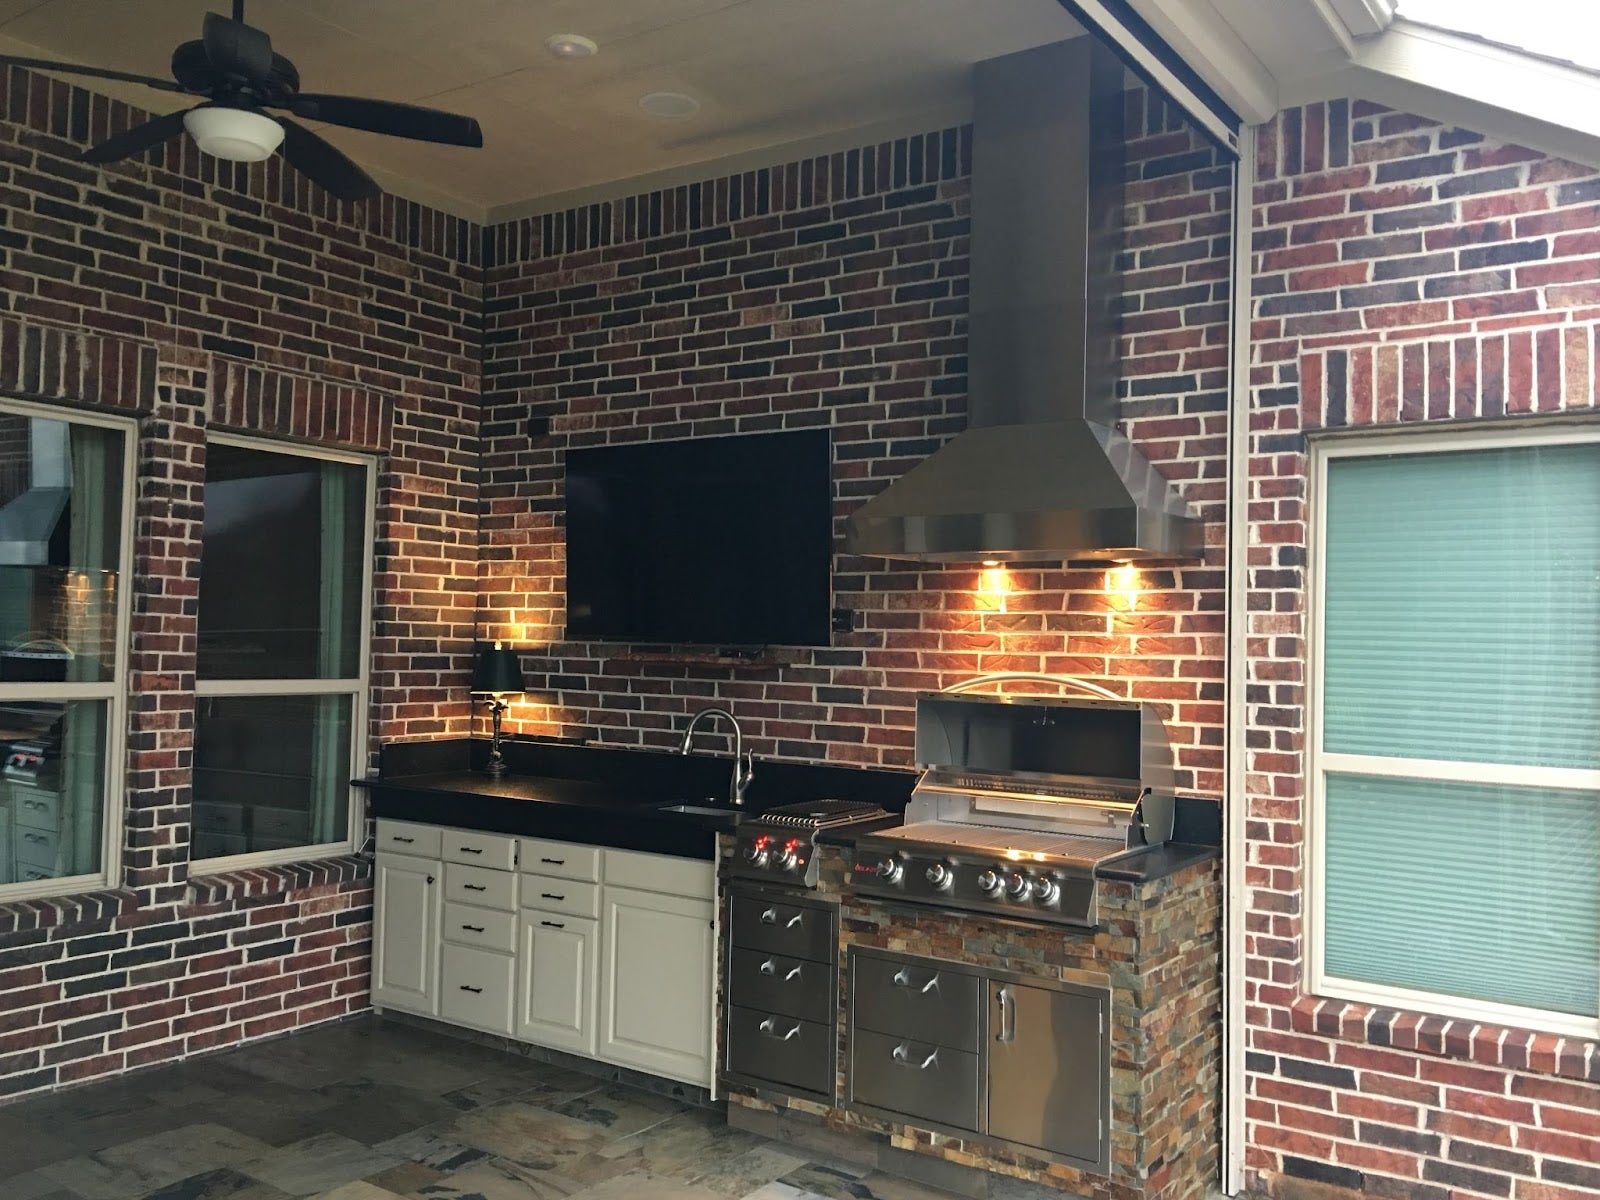 Enclosed patio with a classic brick wall, featuring a stainless steel Proline range hood over a grill and sink, complemented by ambient lighting - prolinerangehoods.com.